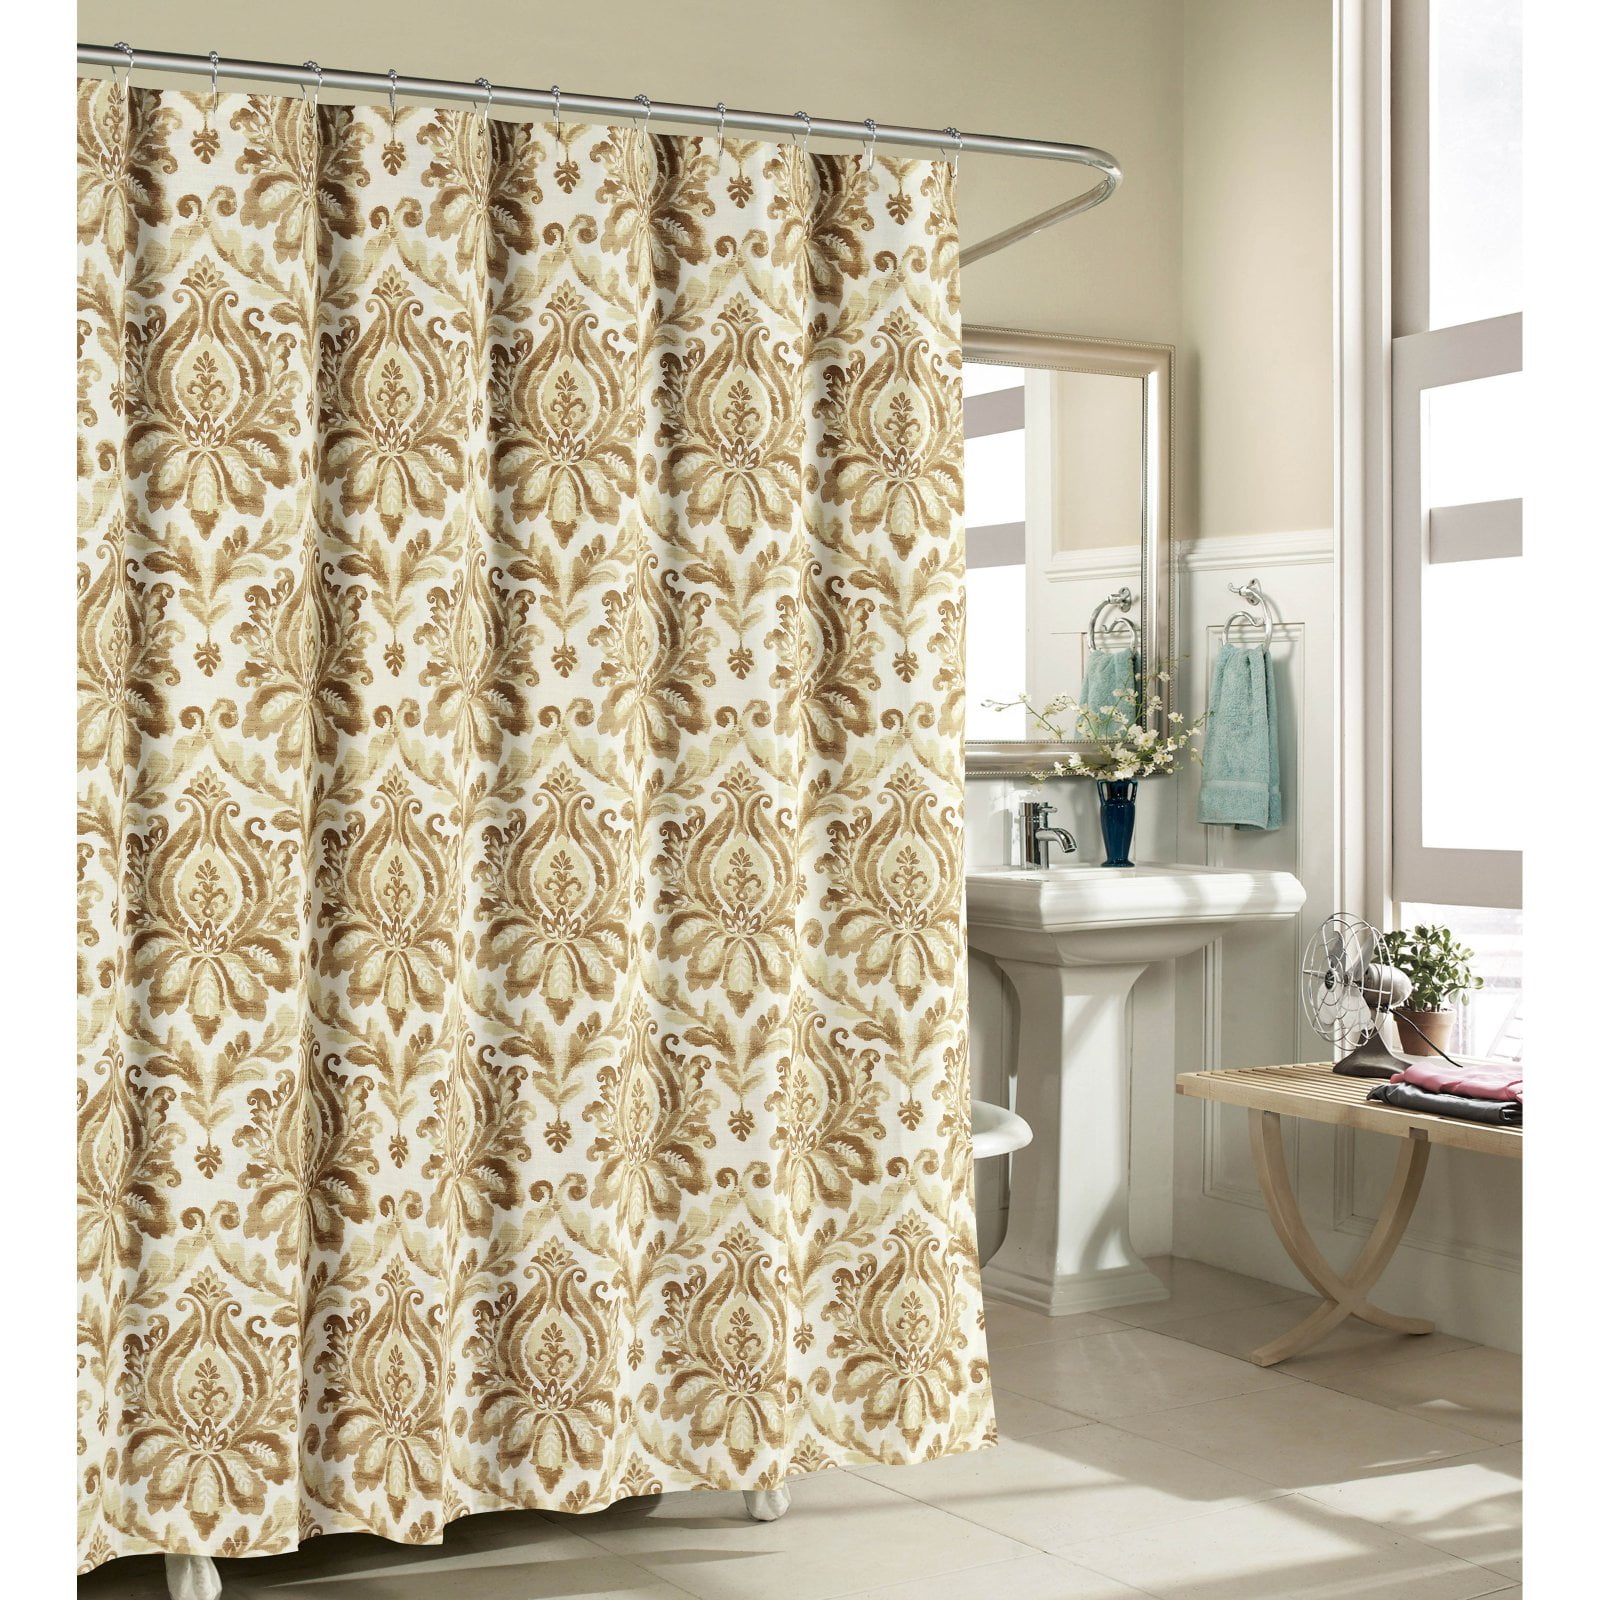  Expensive Shower Curtains 